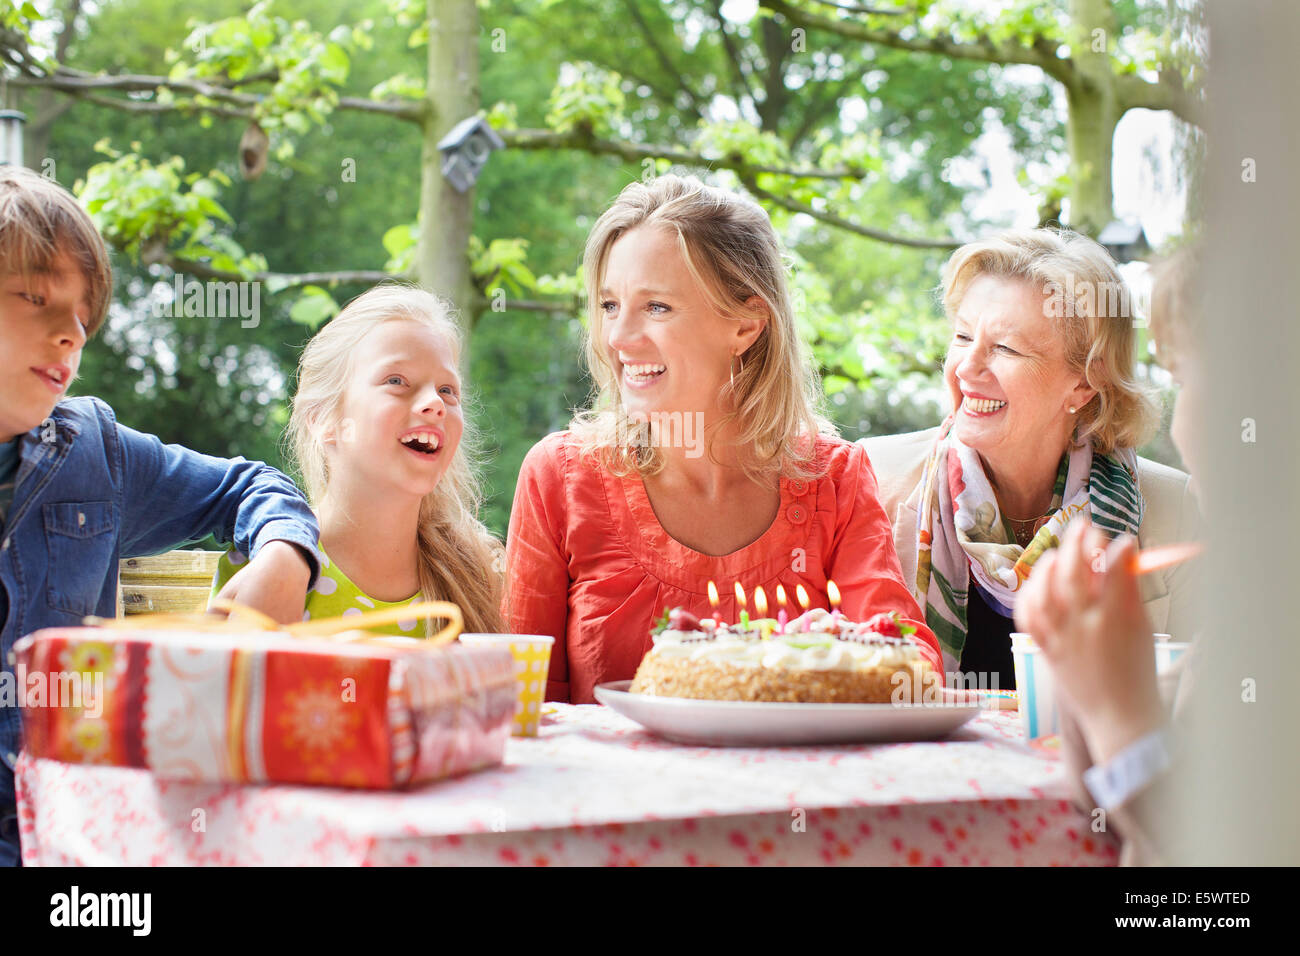 Girl making birthday wish with her family at birthday party Stock Photo